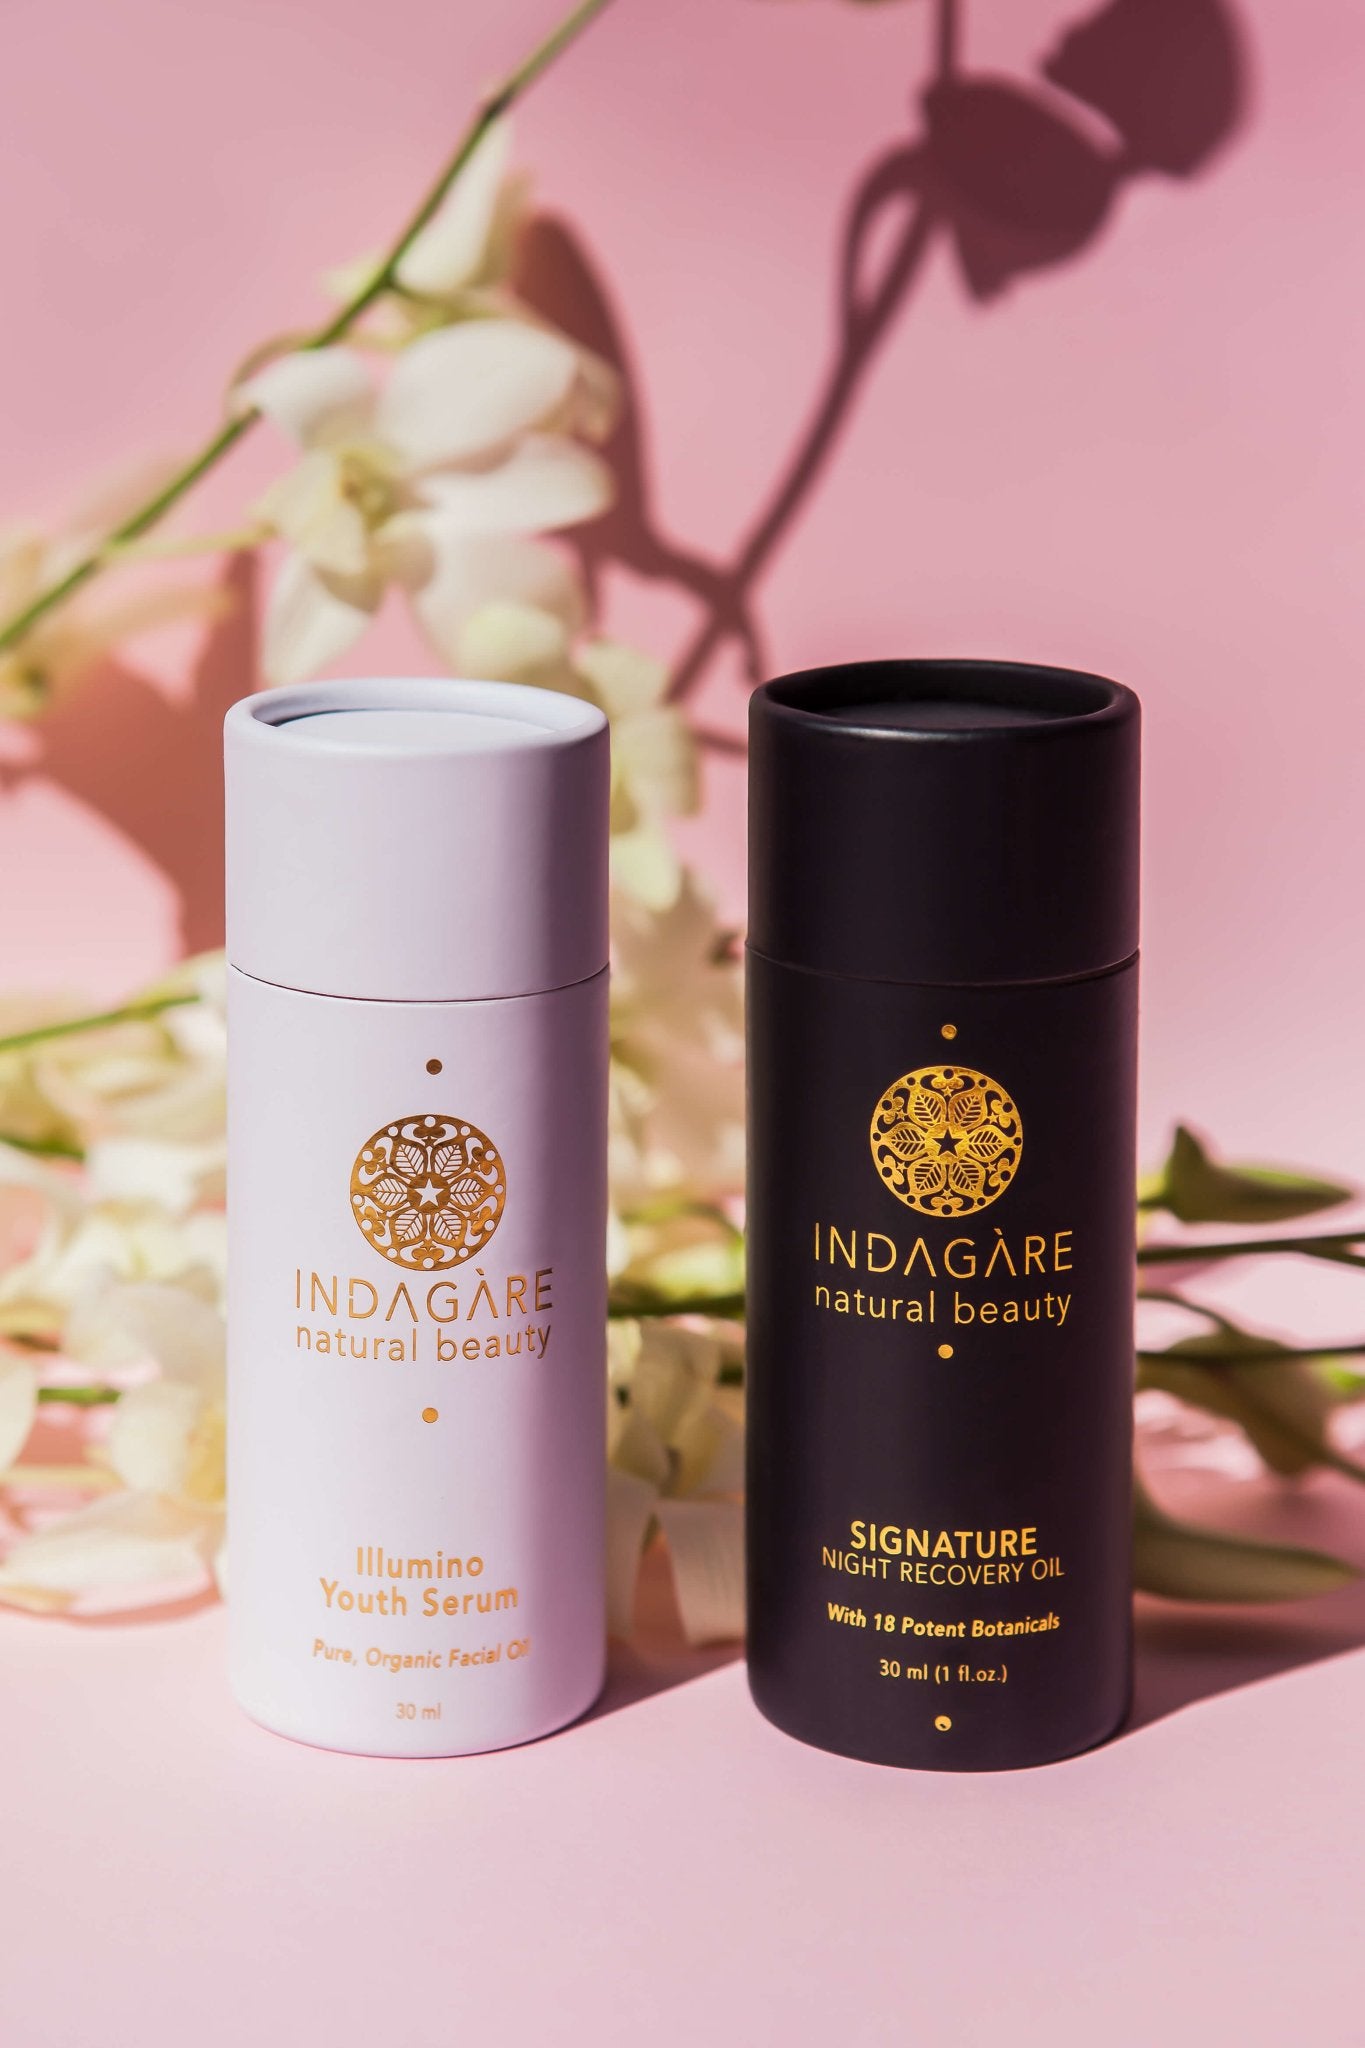 How To Get The Most Out of Your Natural Skincare - Indagare Natural Beauty